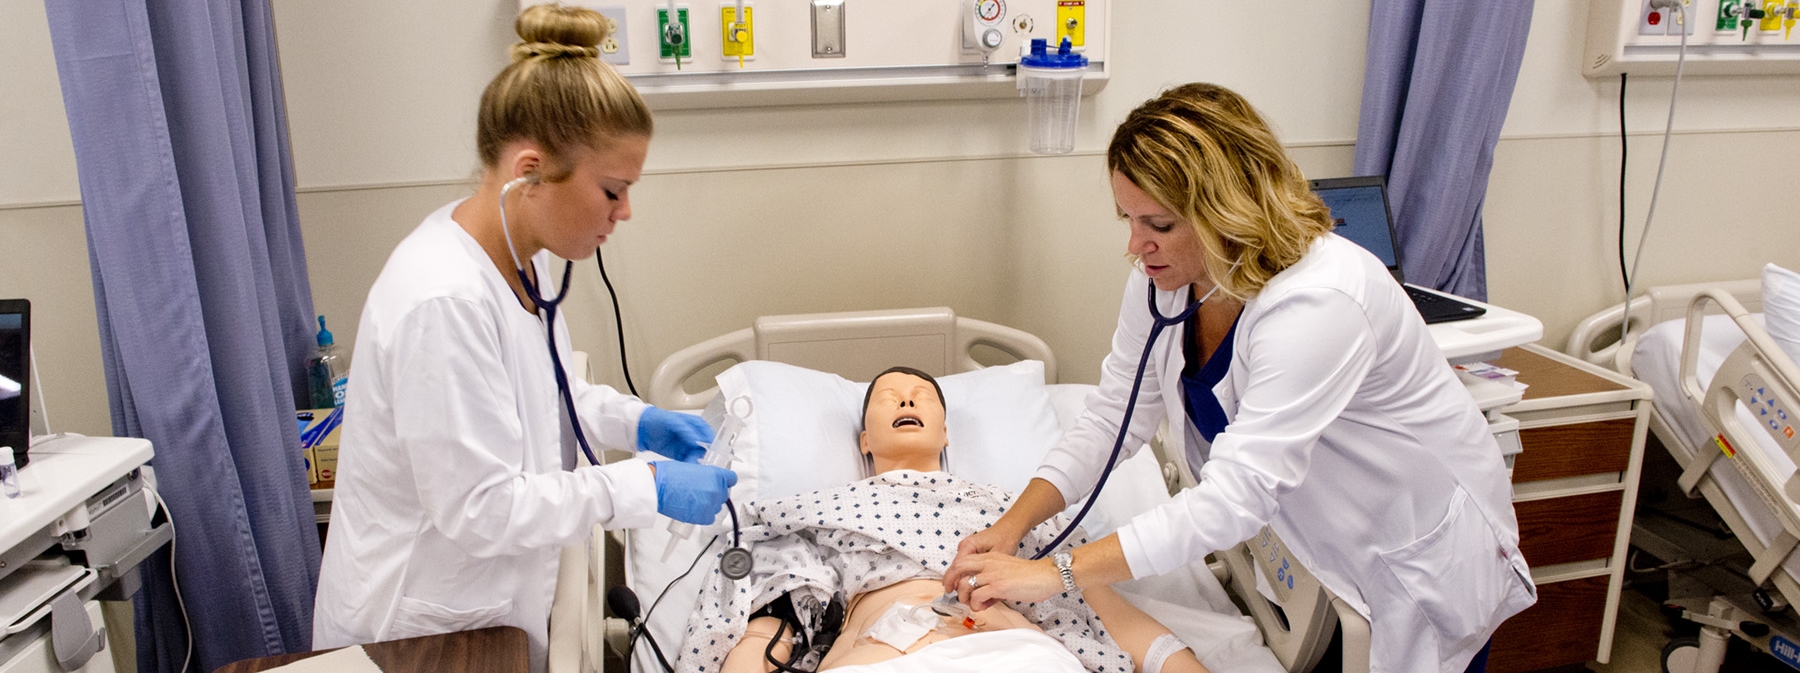 Two students in a nursing lab practicing skills on a practice dummy